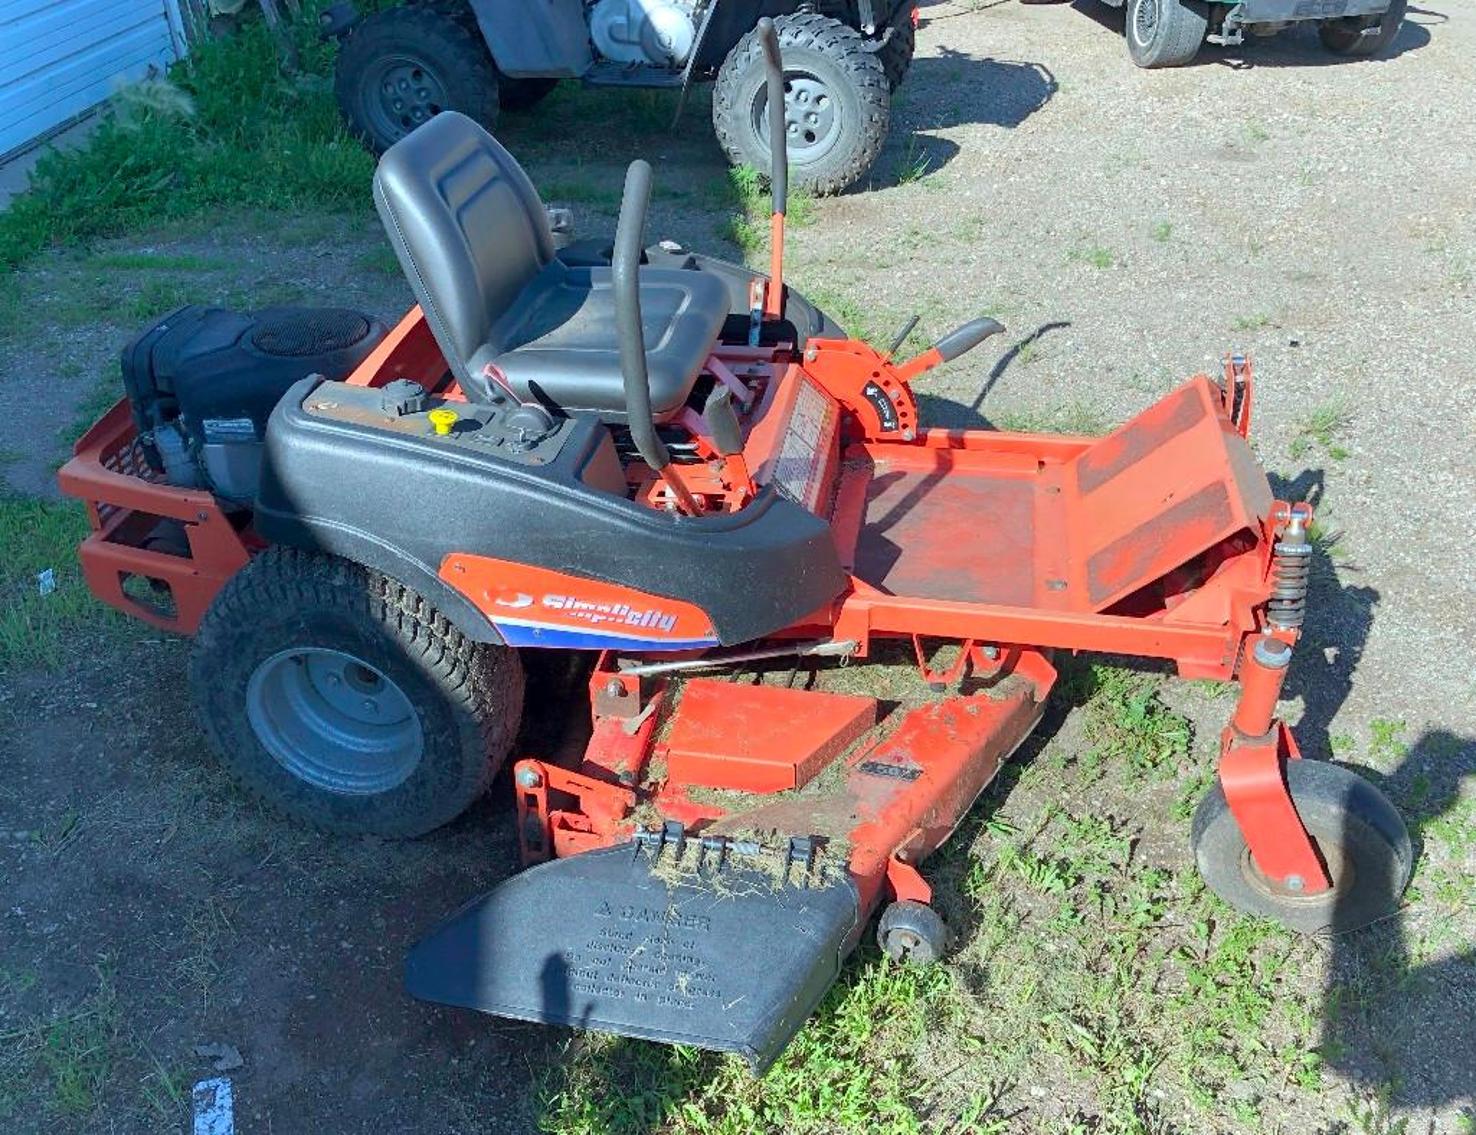 Farm Machinery, Vehicles, Lawn Mowers and More